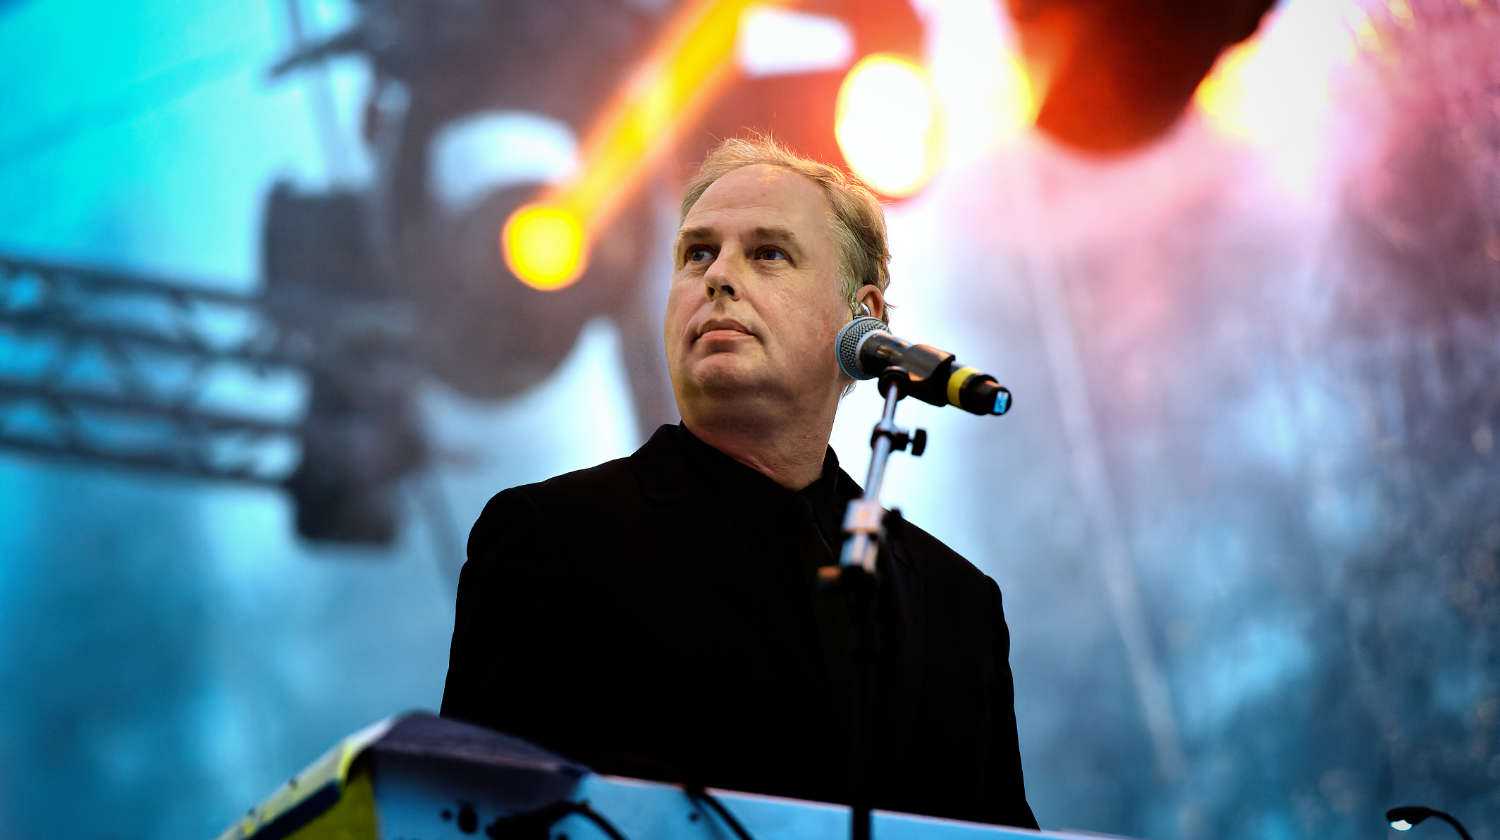 Paul Humphreys (Orchestral Maneuvres in the Dark OMD)